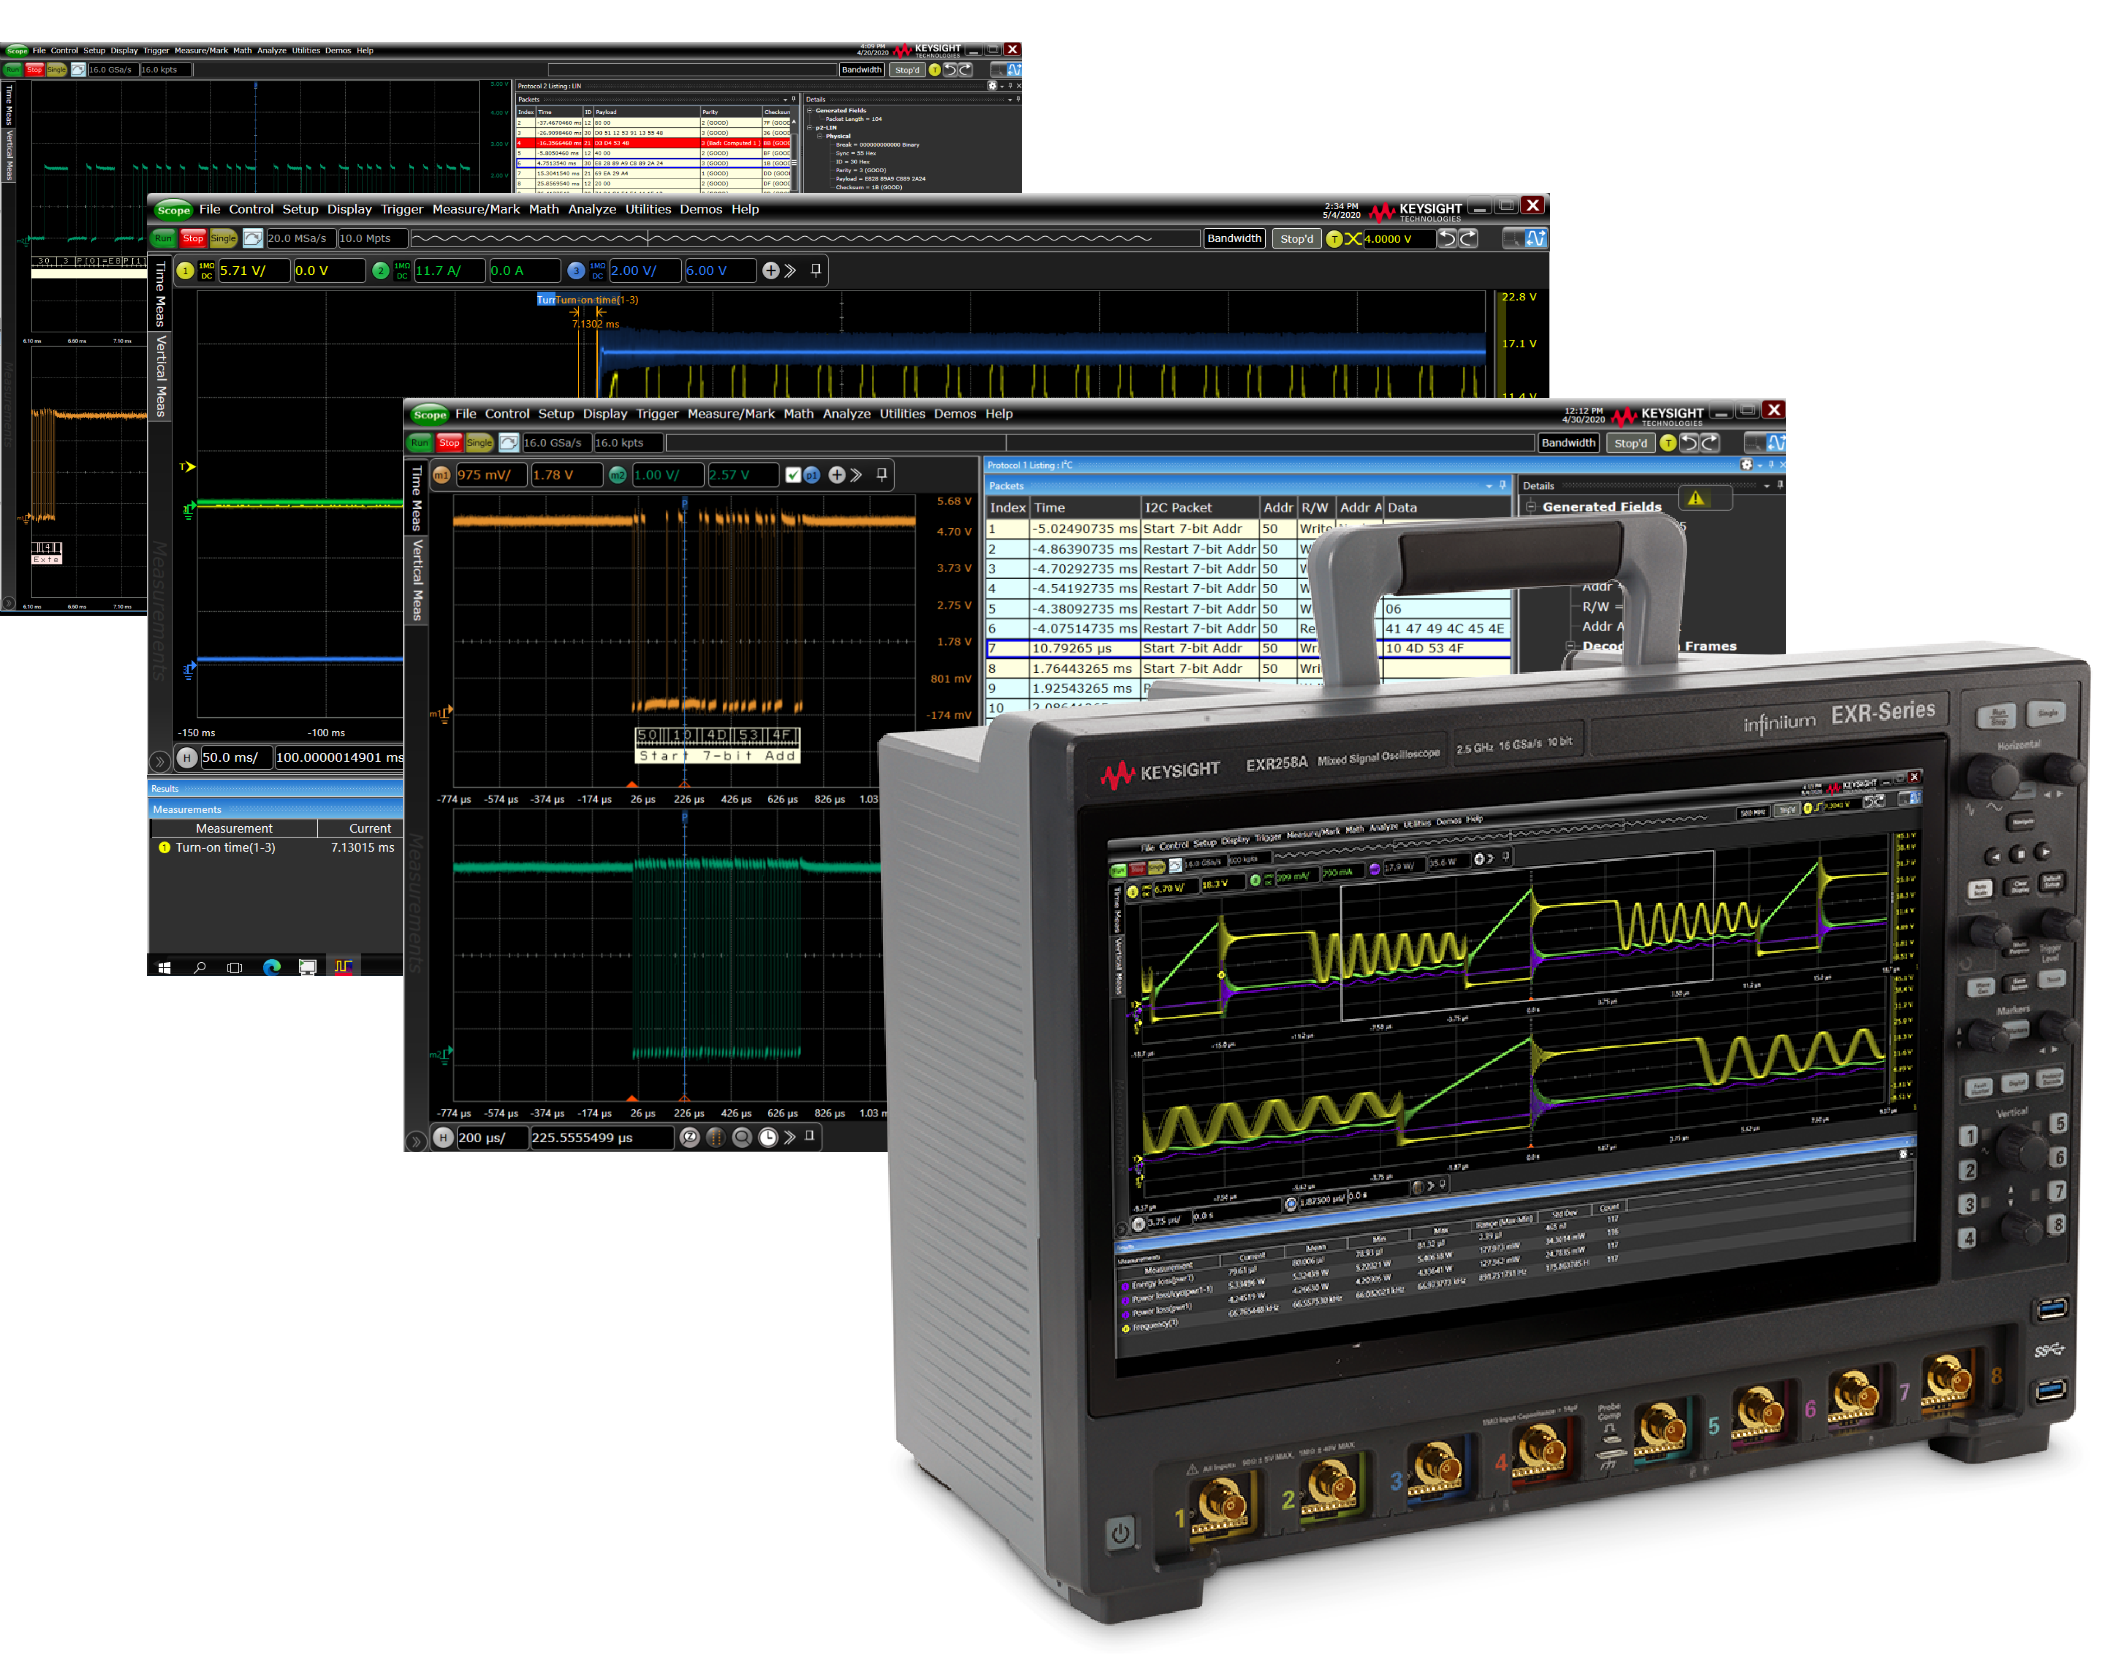 PathWave Bench DMM Software enable each connection and control without programming